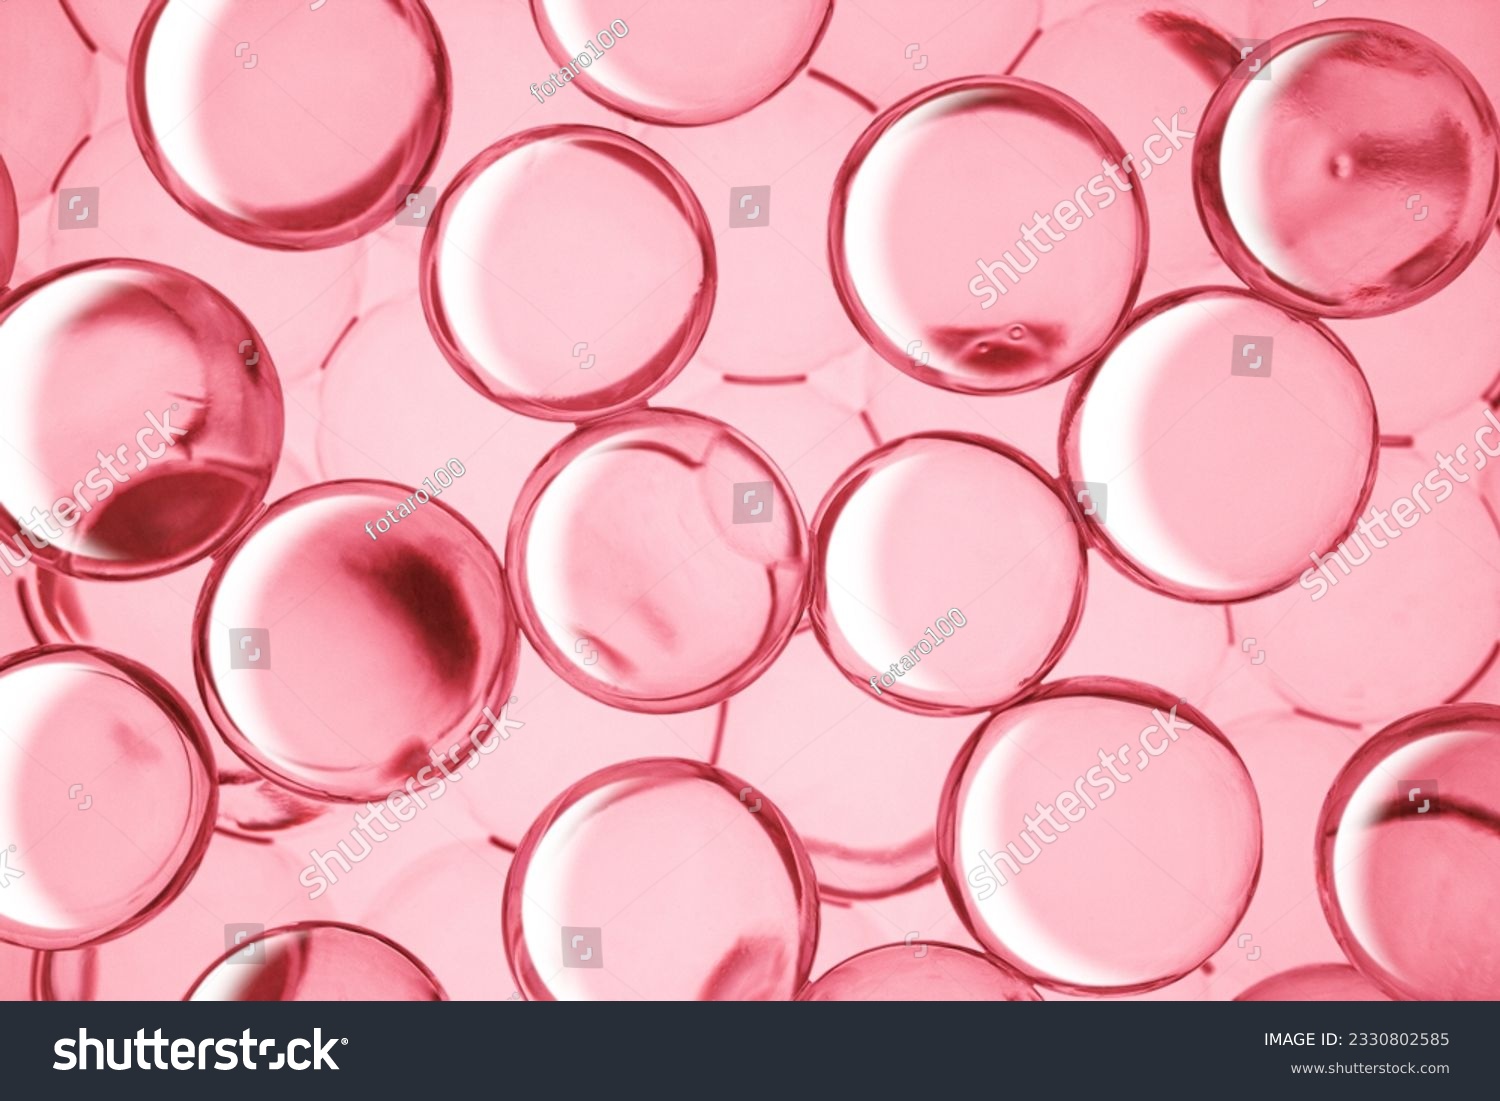 Cream gel drops red transparent cosmetic sample texture with bubbles on pink background #2330802585